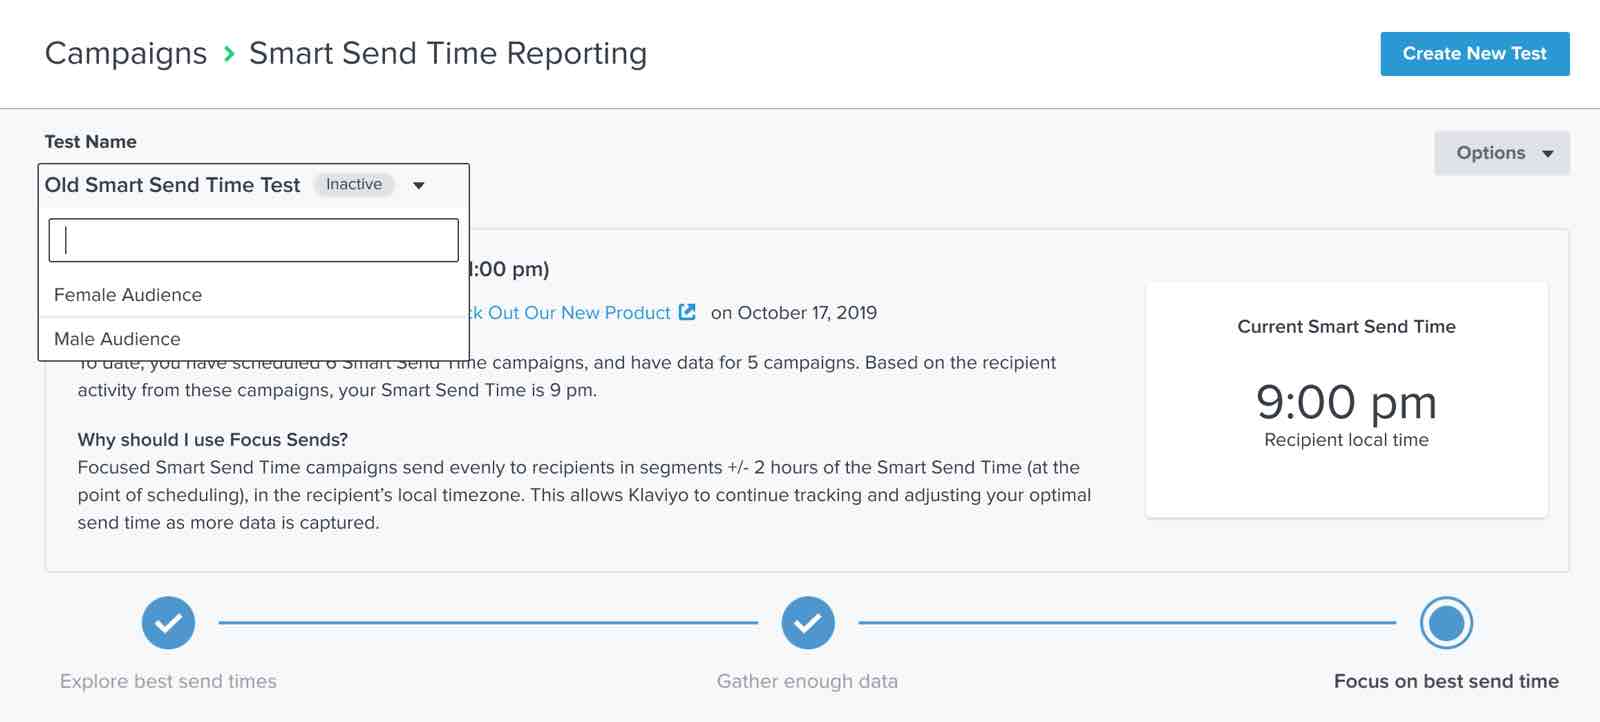 The Smart Send Time reporting page in Klaviyo